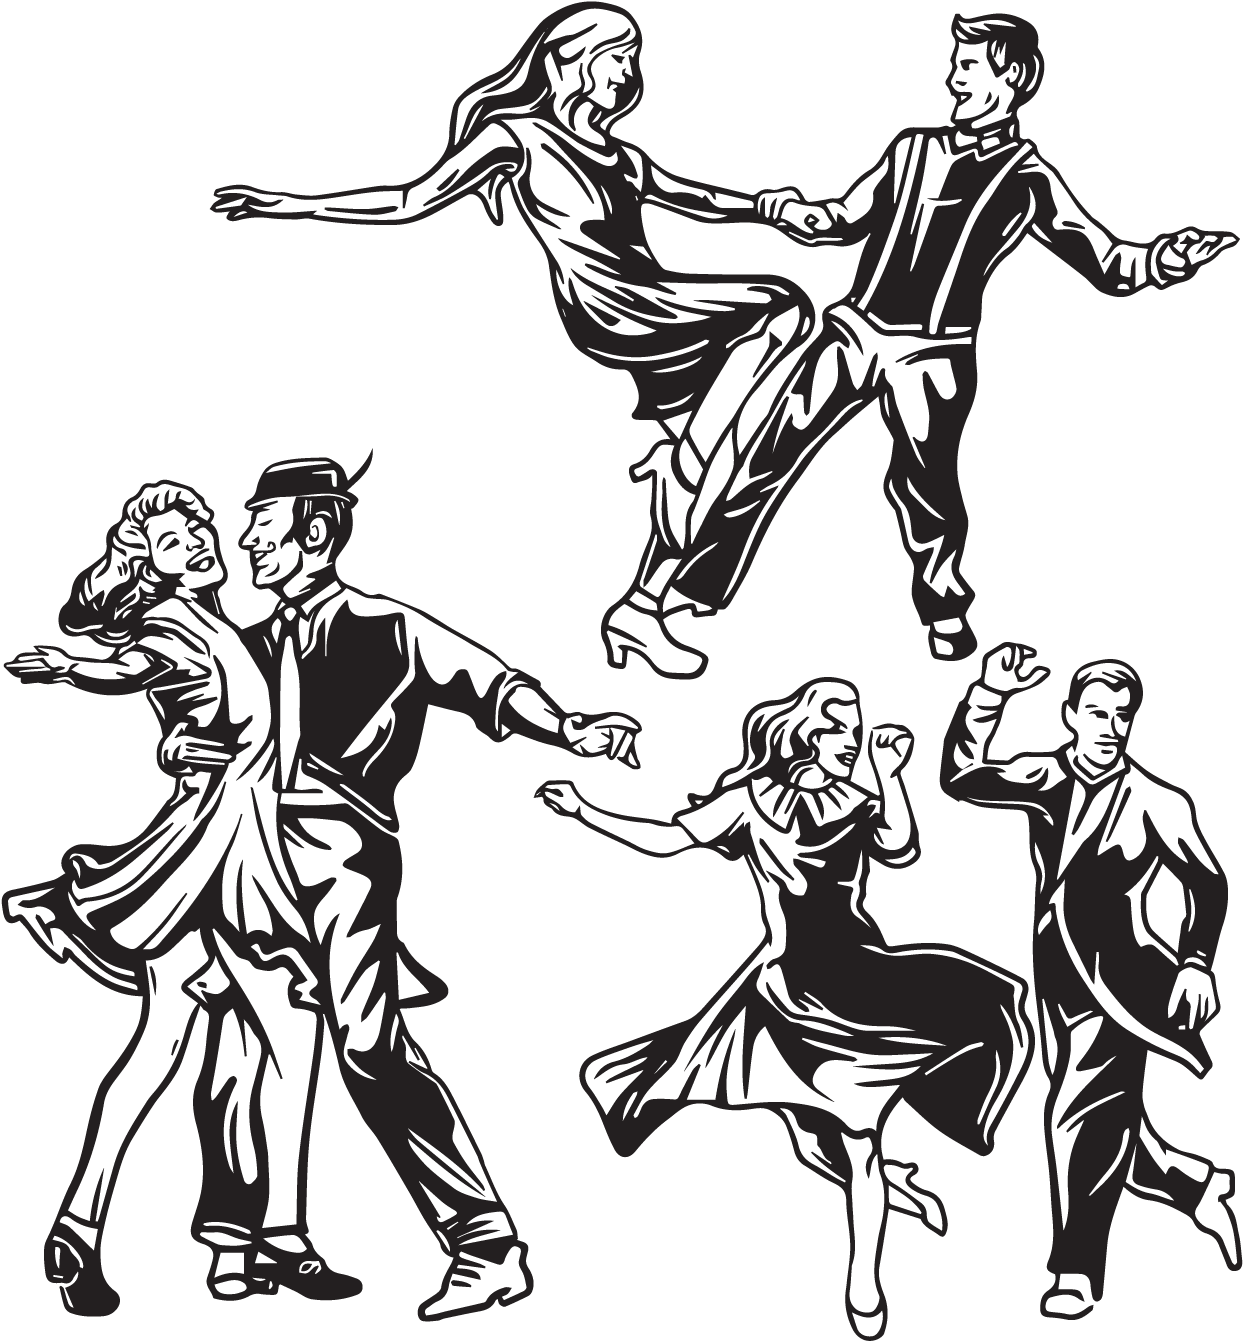 Tap Dance Silhouette Â€“ Assets For All - 80 S Dance Draws (1400x1400)